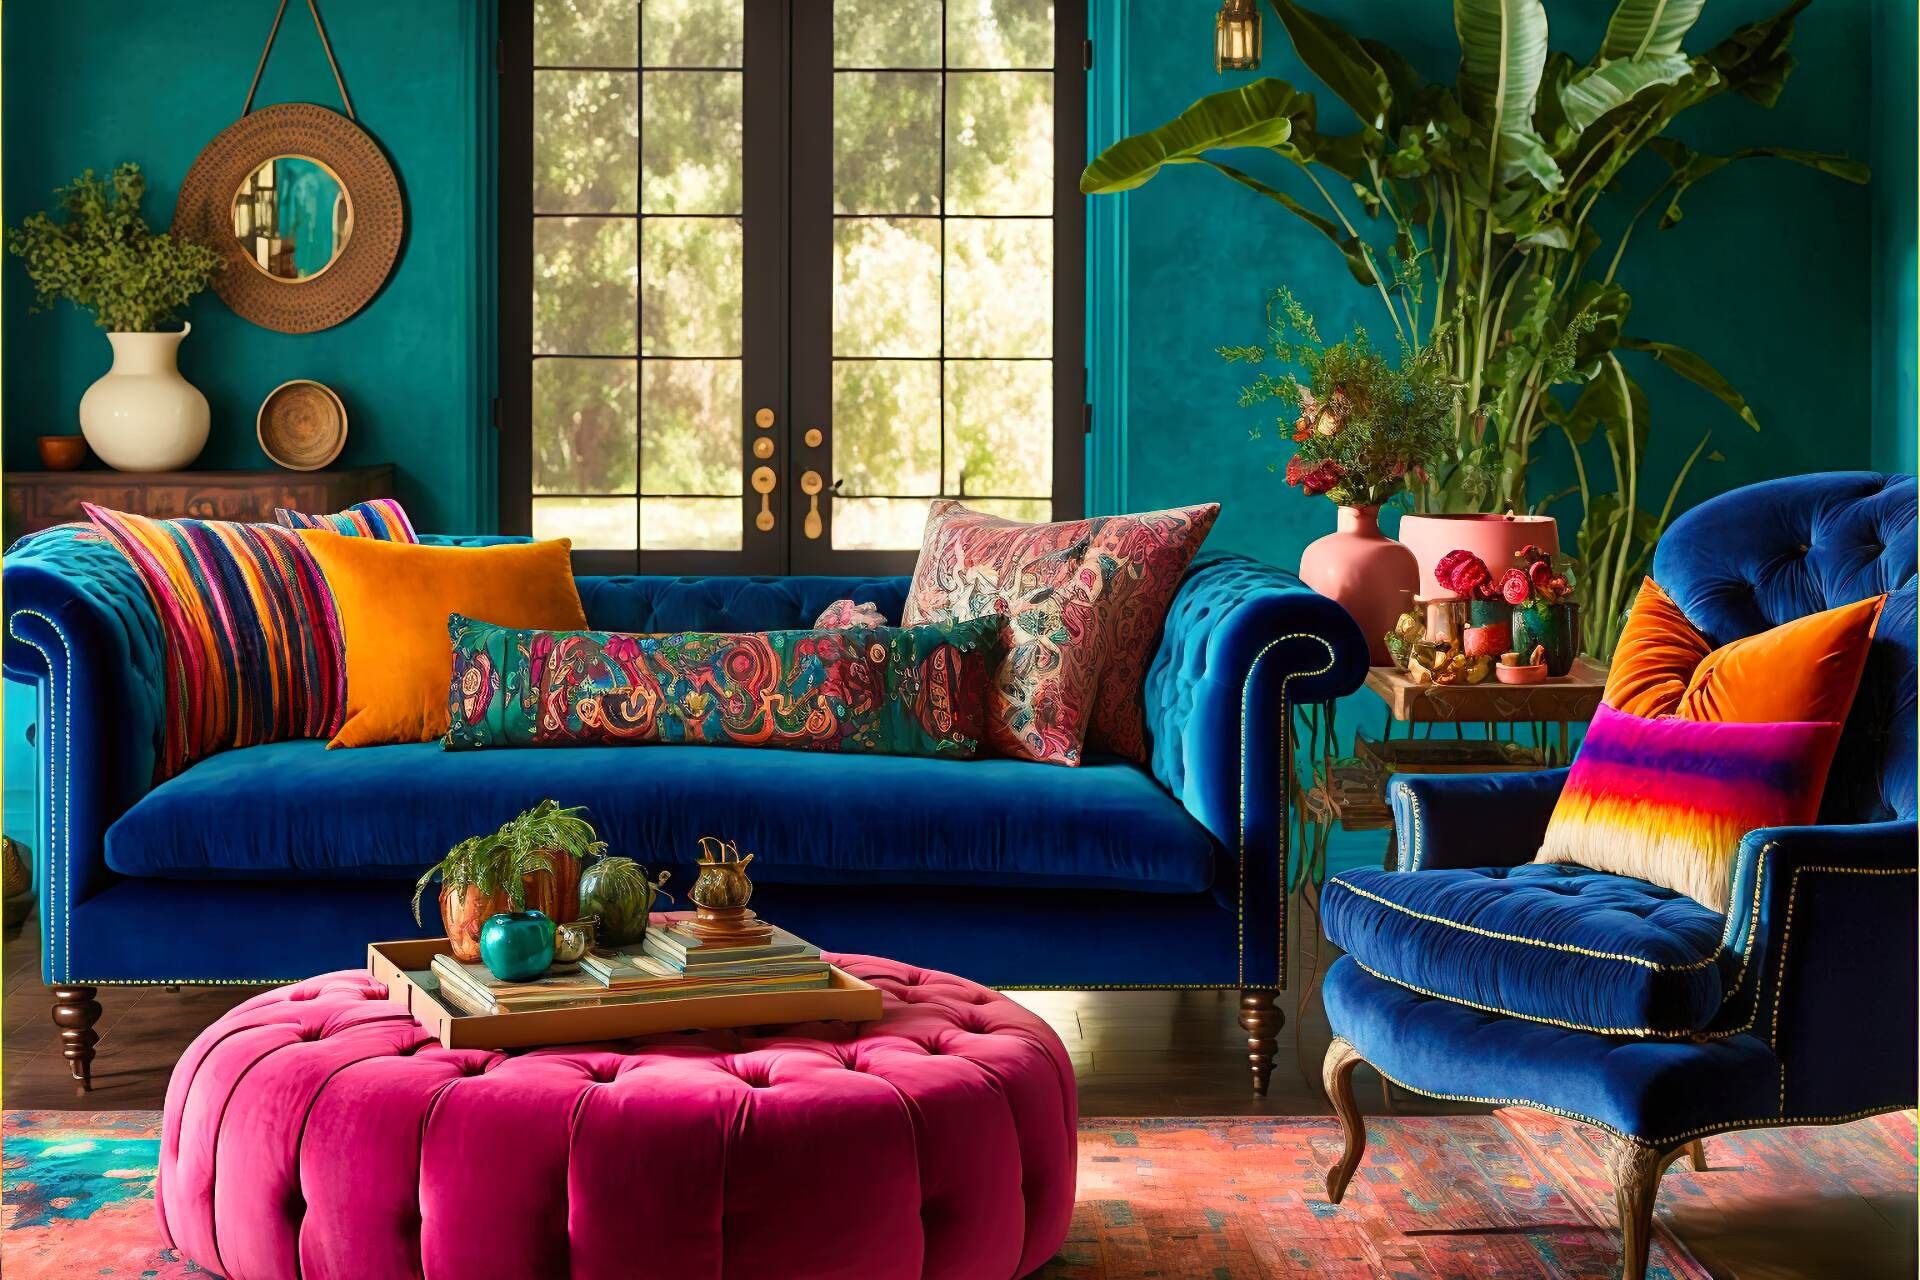 Liven up Your Space with Splashes of Blue and Cheery Hues